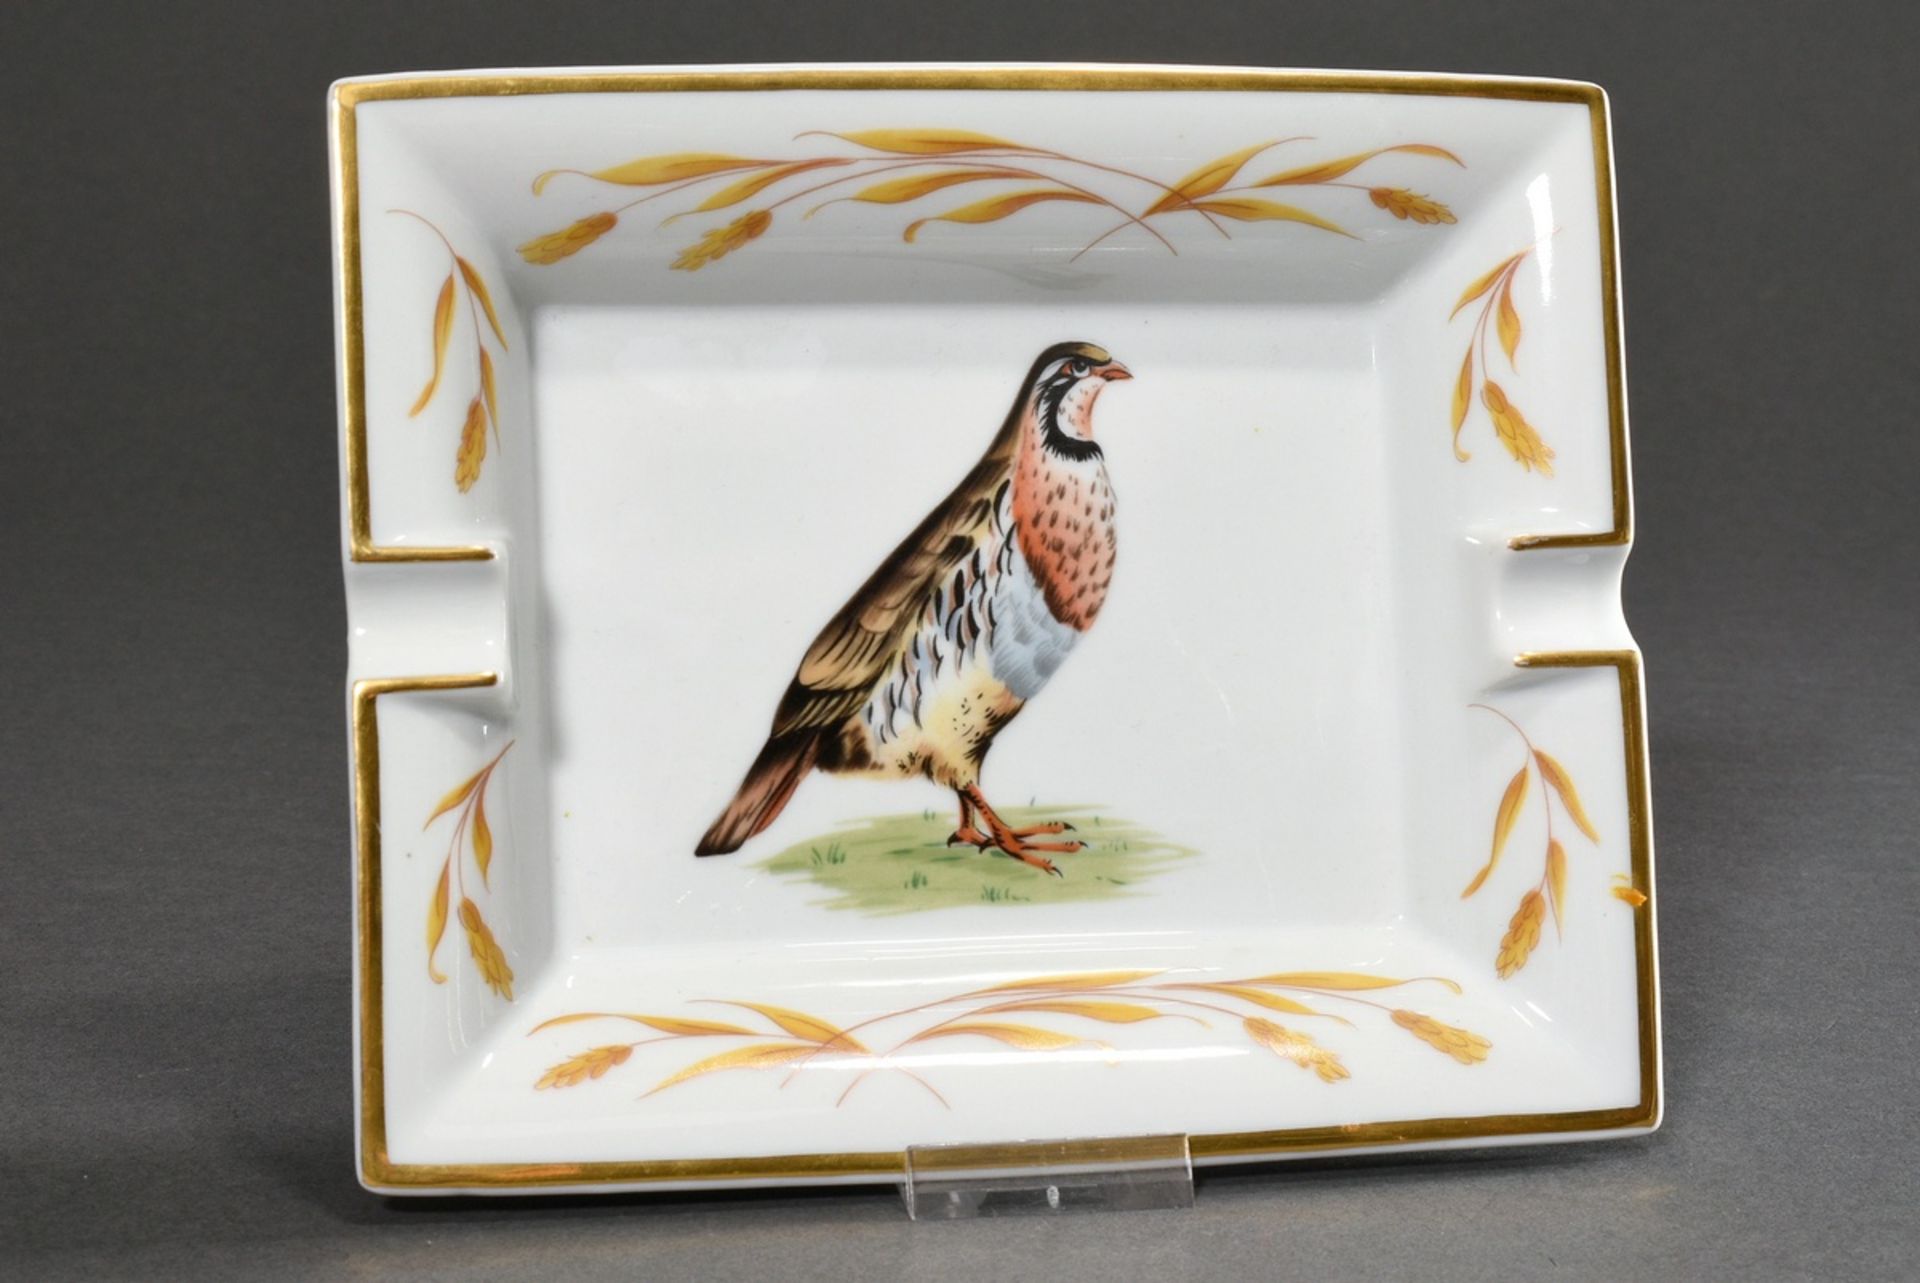 Hermès ashtray with print decoration "Partridge and ears of corn", 19x15,5cm